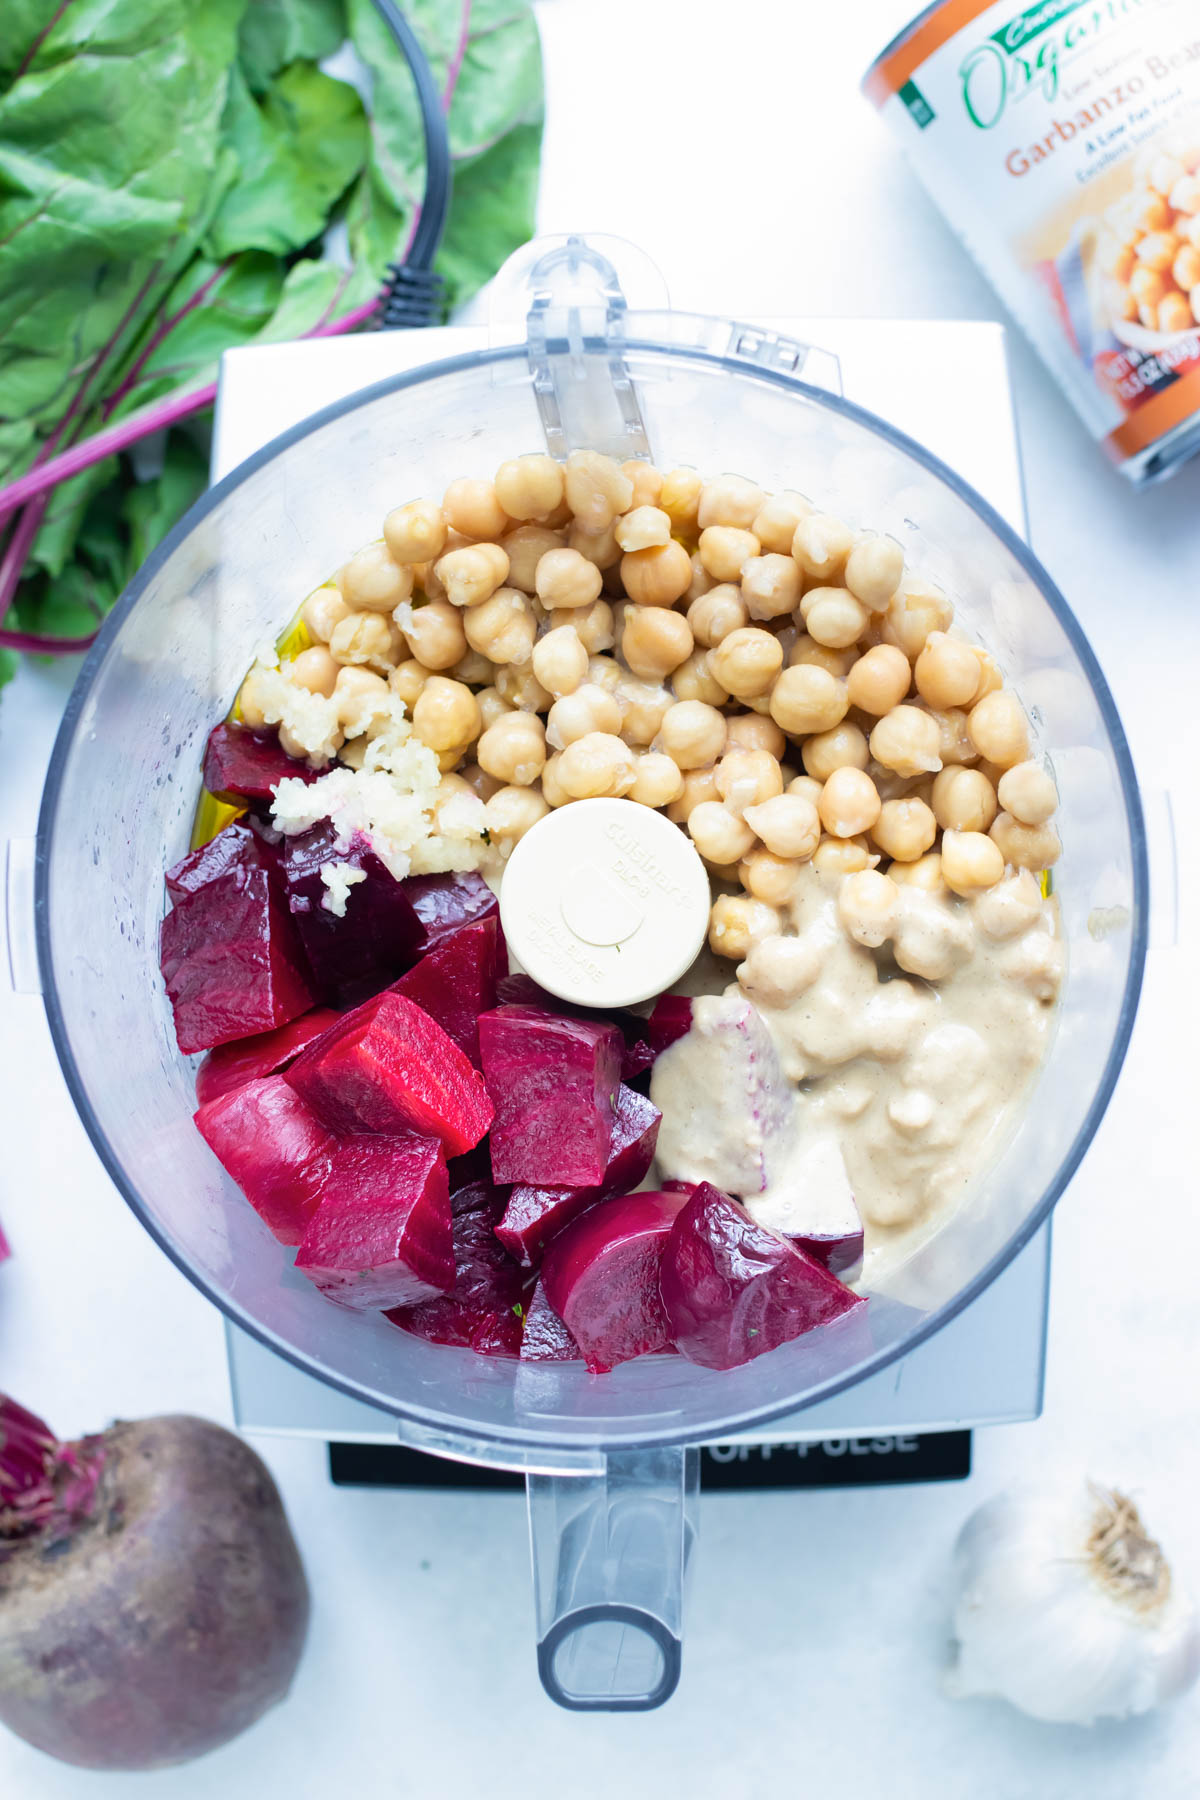 Chickpeas, roasted beets, tahini paste, garlic, and olive oil are added to a food processor.